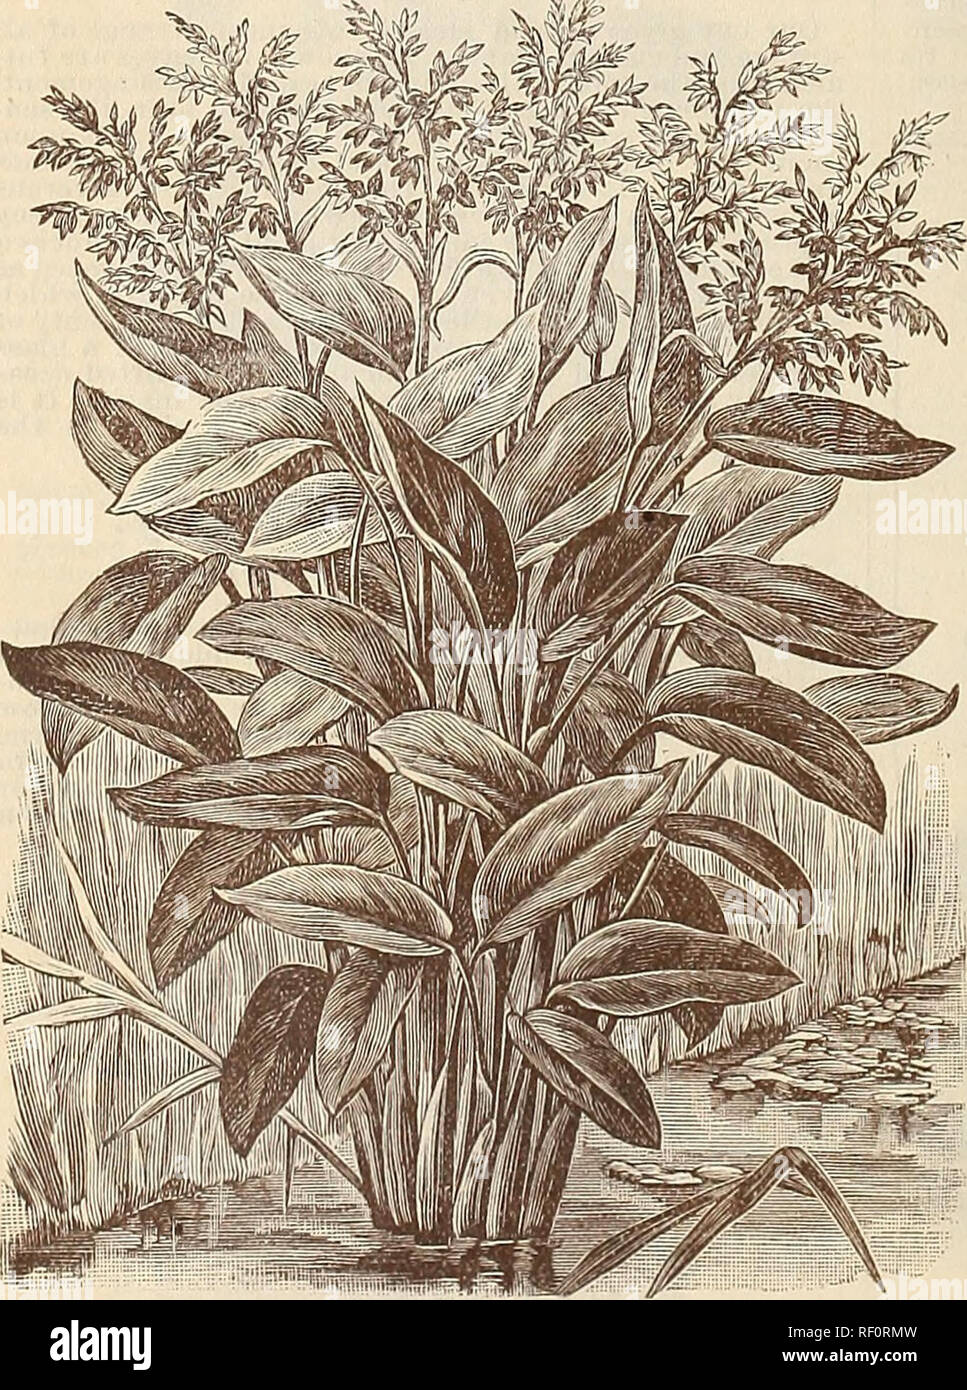 . Catalogue of rare Florida flowers and fruits : season of 1894. Nurseries (Horticulture) Florida Catalogs; Flowers Catalogs; Plants, Ornamental Catalogs. b. fUKfUREA. S. VARIOLARIS. S. RUBRA. S. FLAVA. GROUP OF PITCHER PLANTS. Sarracenia Psittacina.—A dwarf sort -with leaves two to four inches long, the ends shaped like a parrot's beak, marked with white spots and reticulated with purple veins. Very distinct. 1.5c. each. Sarracenia'Drummondii Alba. — An exceedingly beautiful and highly prized sort and so rare that we vvere requested to furnish specimens of it to the Botanic Garden at Cambridg Stock Photo